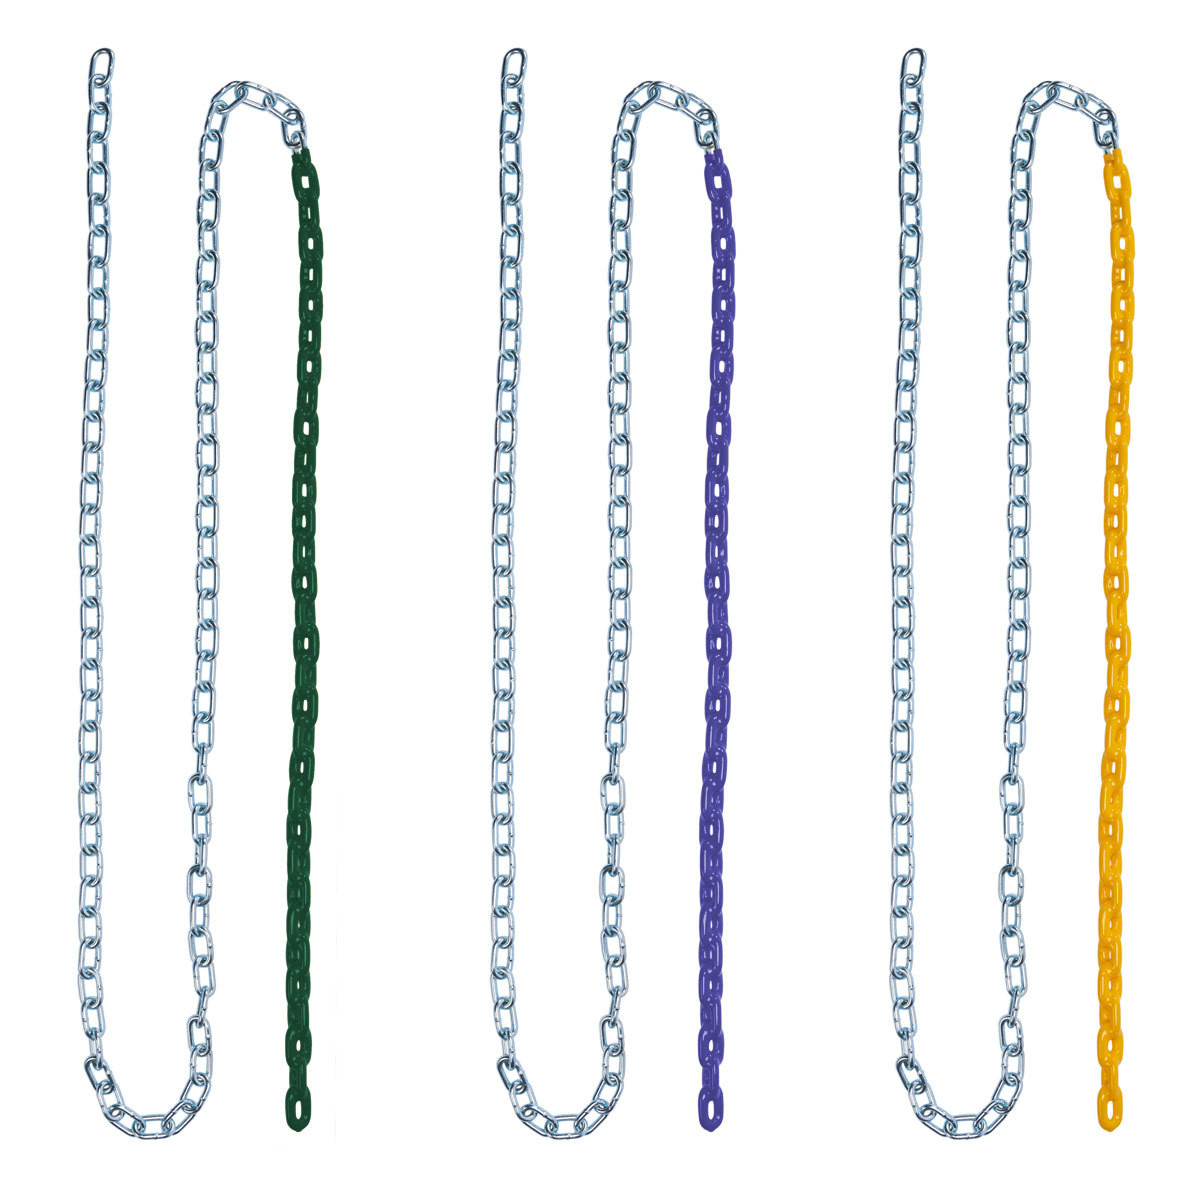 Plastisol Coated Chain - Yellow, Blue, Green